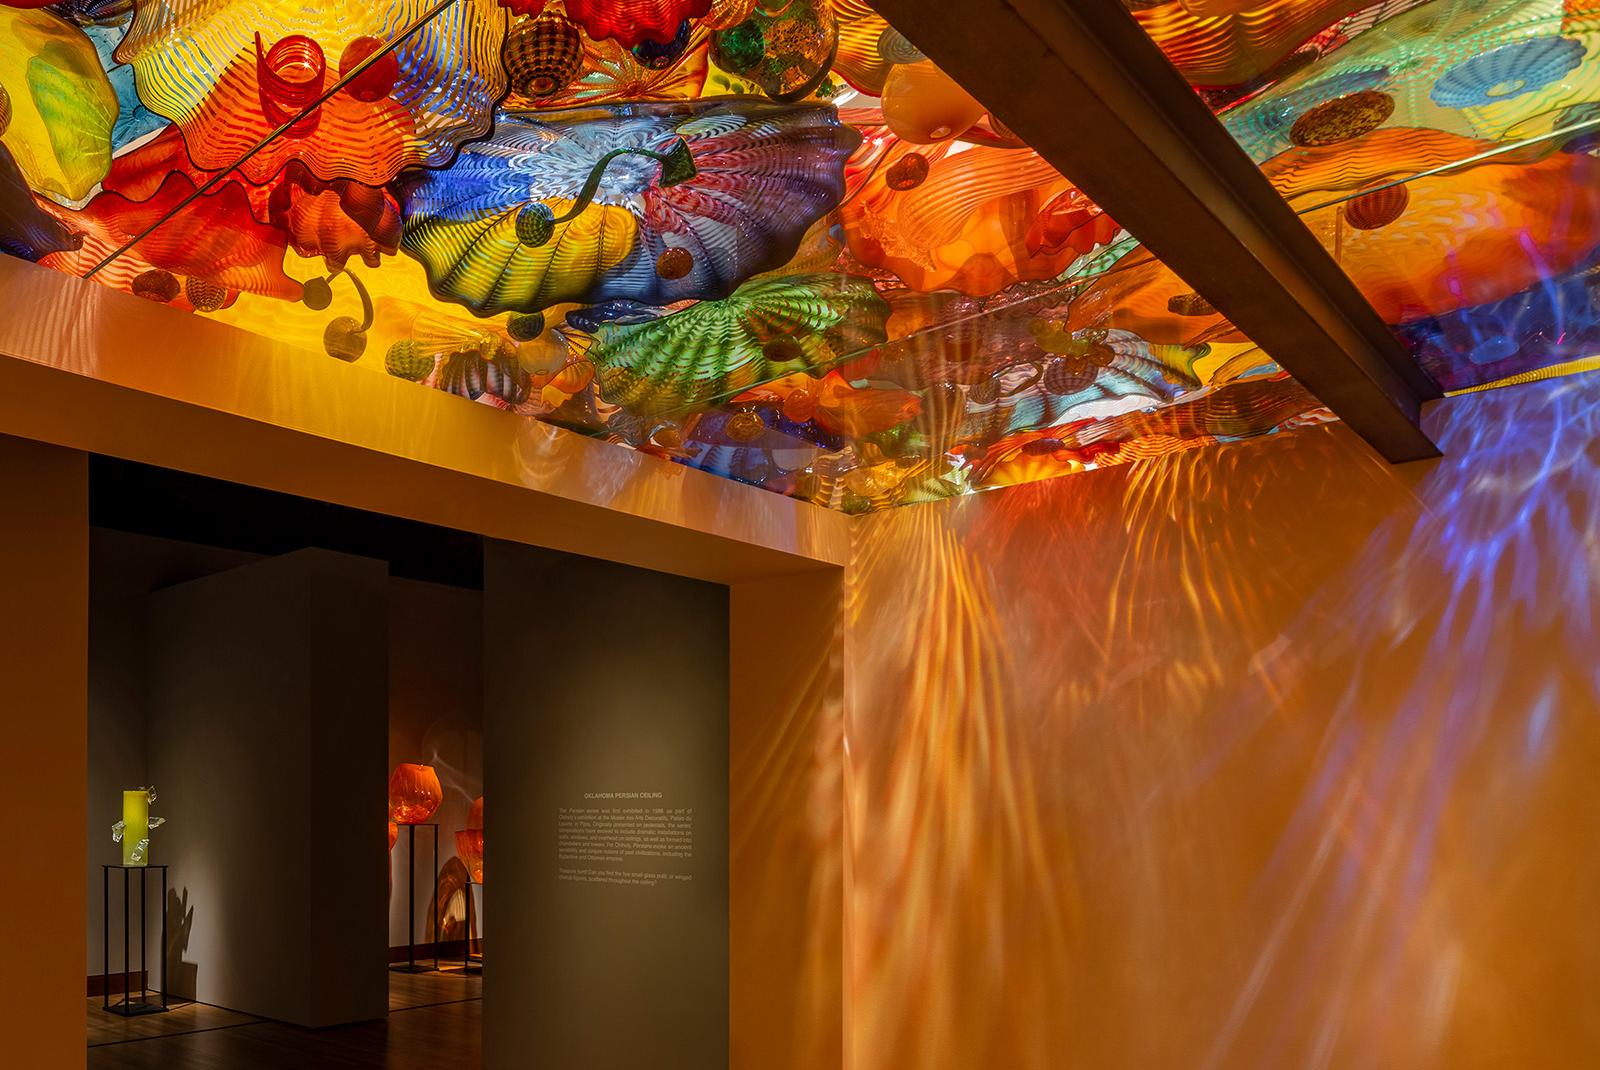 Exhibitions | Chihuly